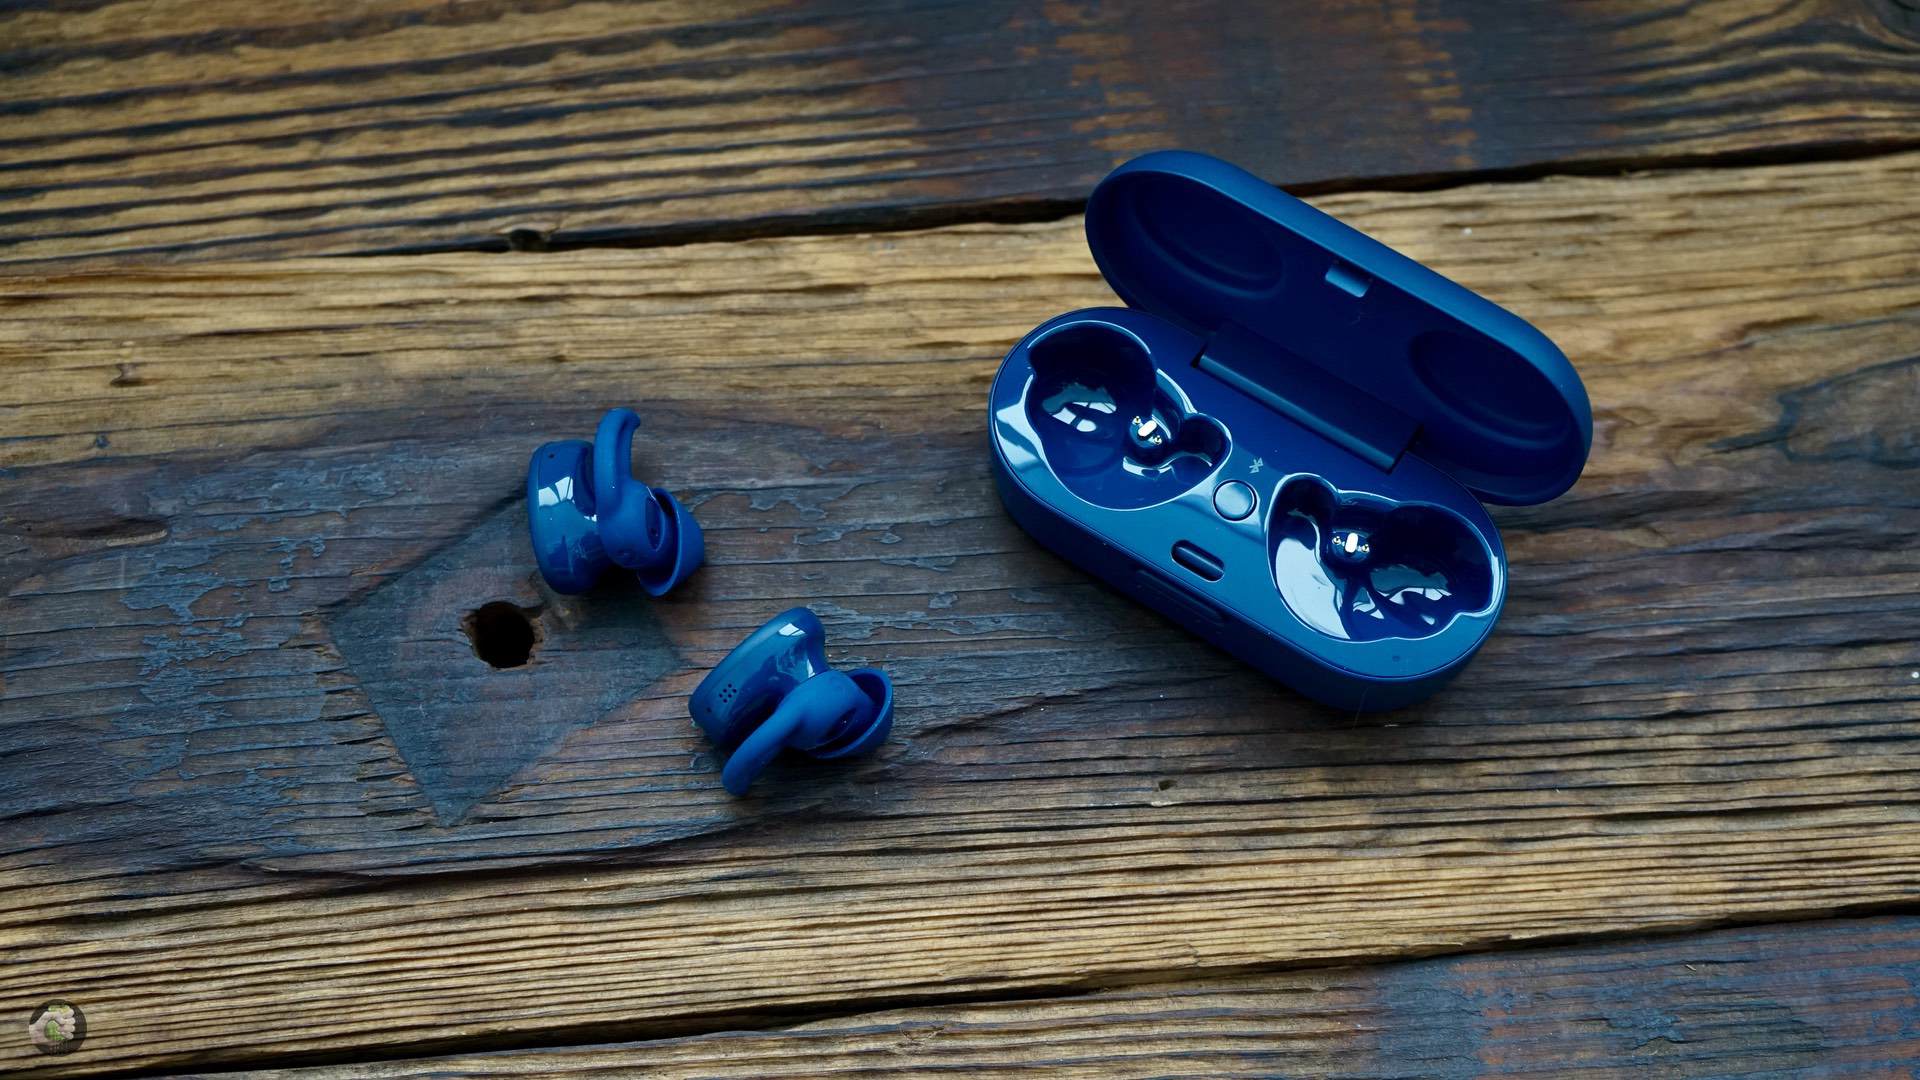 Bose sports earbuds